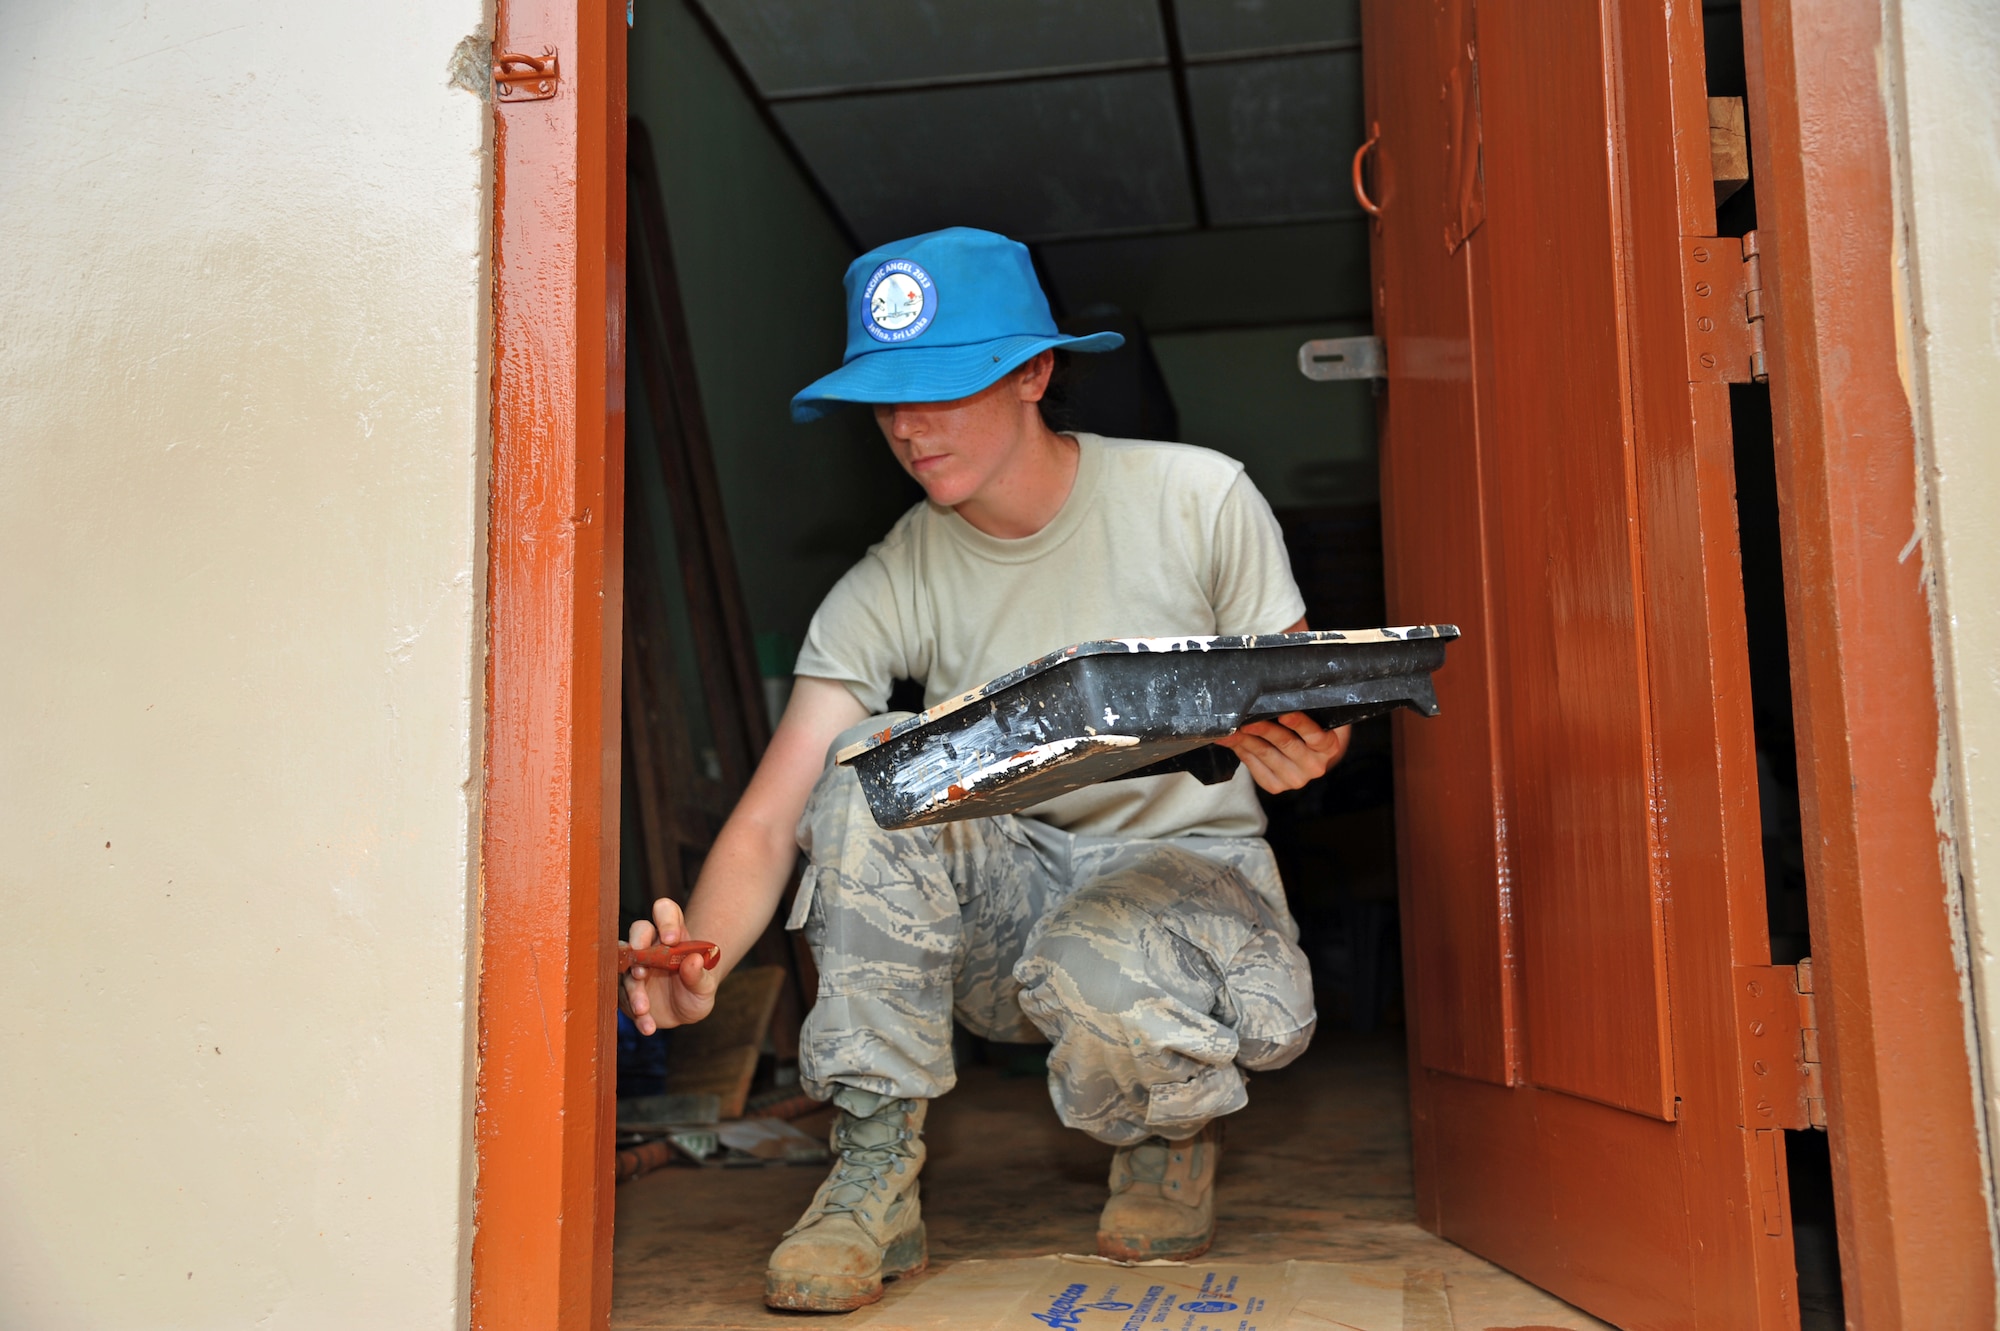 JAFFNA, Sri Lanka – 1st Lt. Renee Kittka, 354th Civil Engineering Squadron, Eielson Air Force Base, Alaska, paints a window during Operation Pacific Angel 13-4 in Jaffna, Sri Lanka, Aug. 6. More than 50 Air Force, Army, Marine Corp and Navy personnel are in Jaffna on a humanitarian mission to refurbish schools and provide medical care to Sri Lankans during PACANGEL 13-4. (U.S. Air Force photo/ Master Sgt. Kerry Jackson)